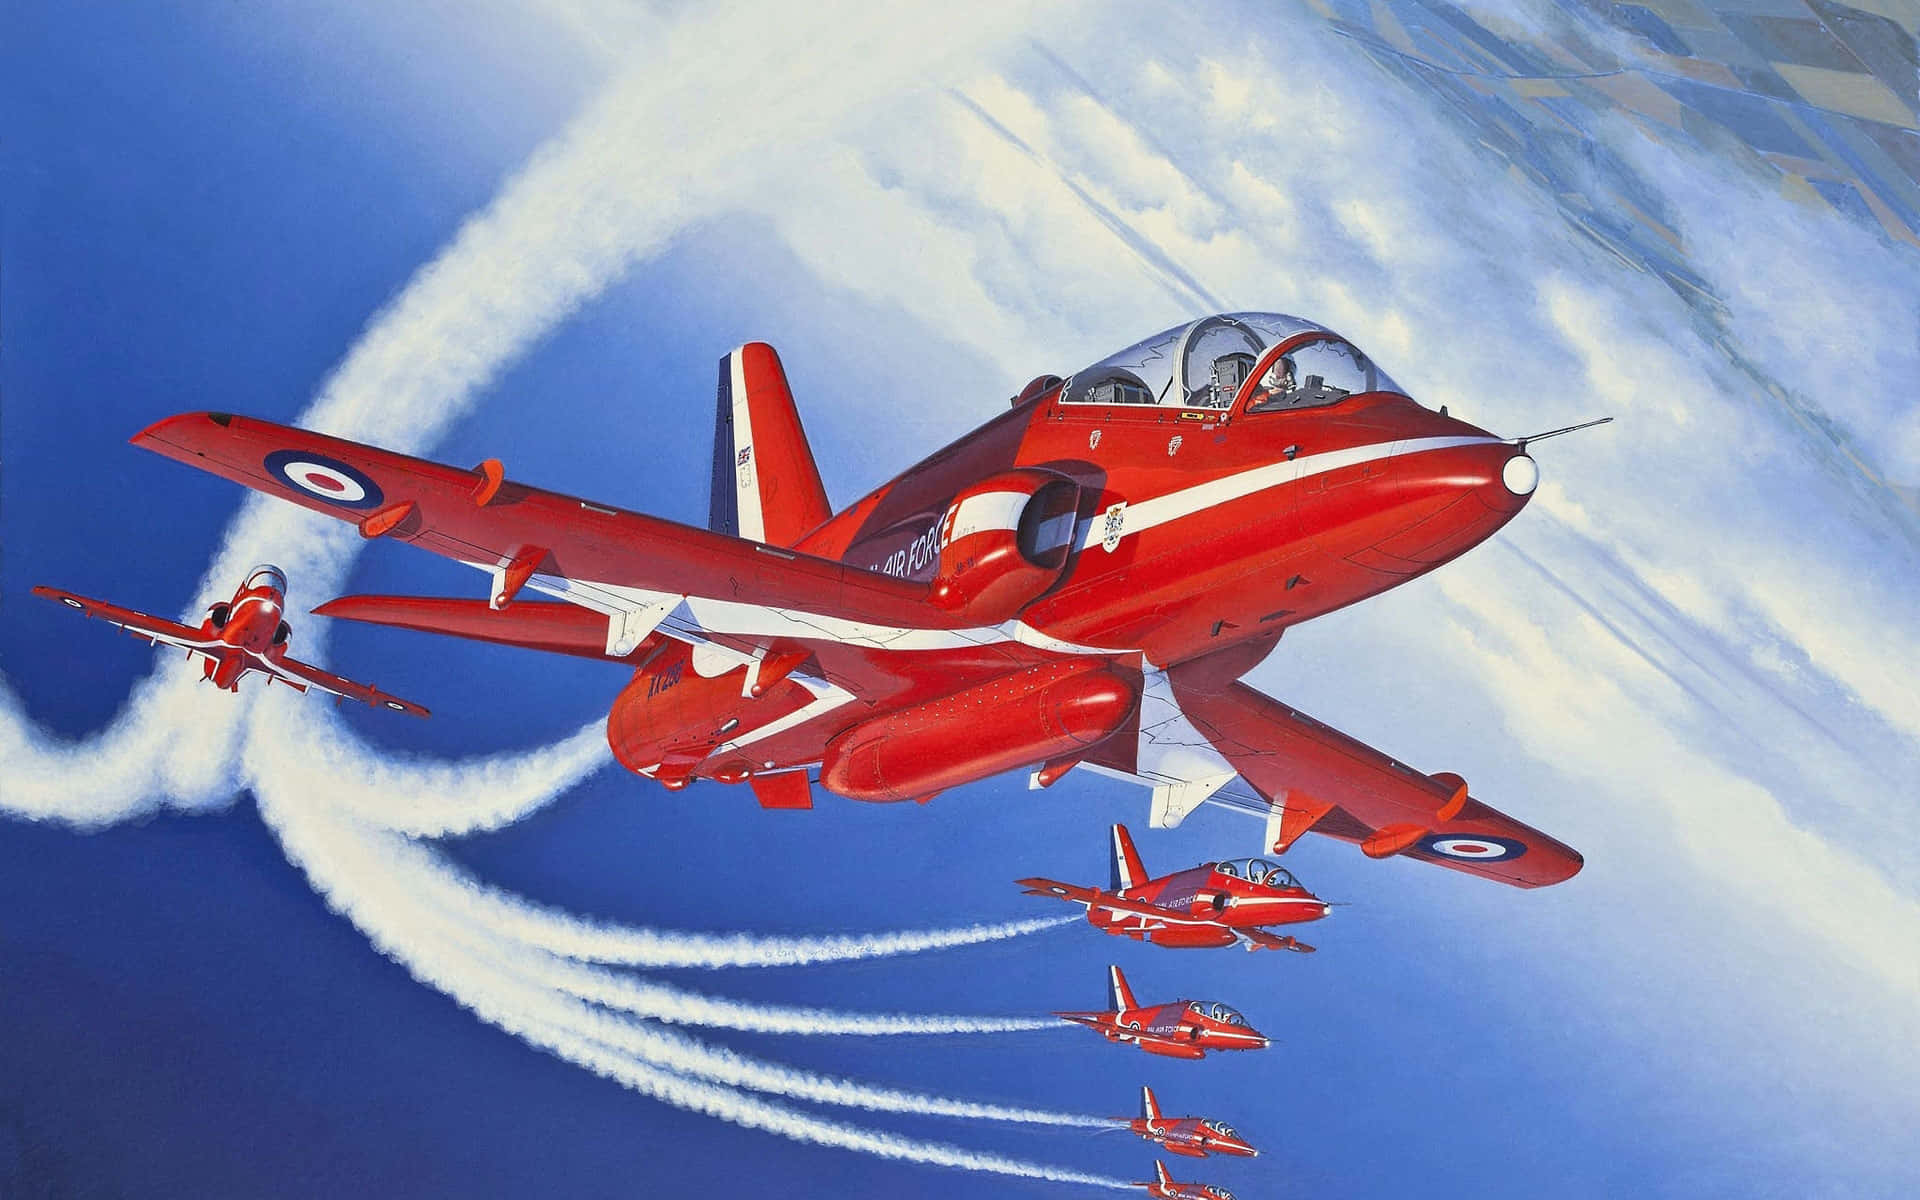 BAE Hawk T1 Red Arrows - A Spectacular Sight in the Sky Wallpaper